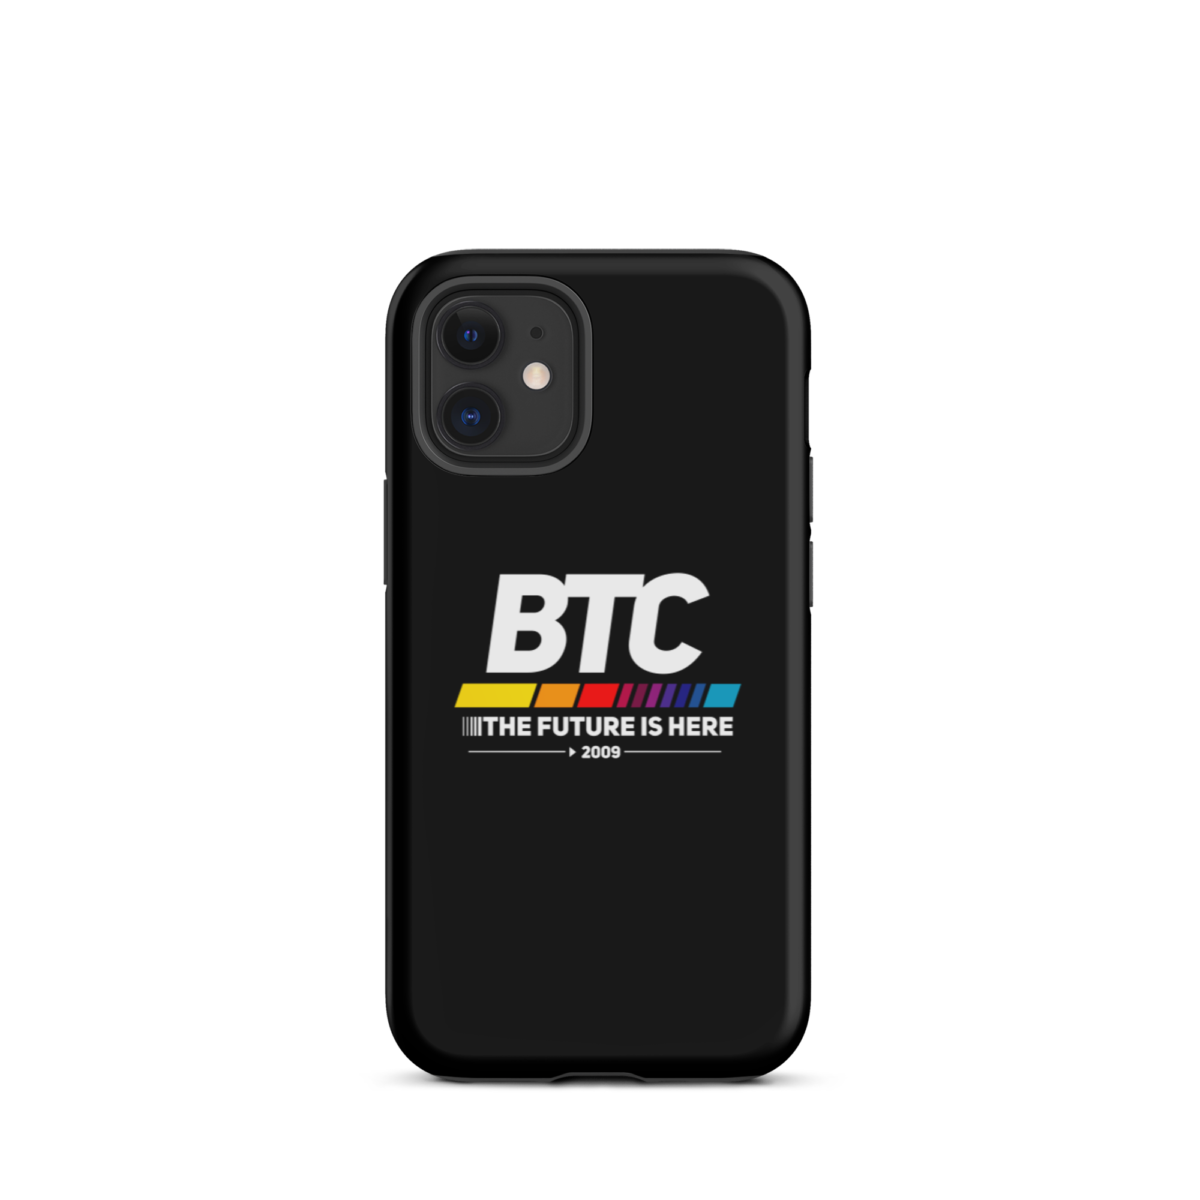 tough iphone case glossy iphone 12 mini front 6345d56a31083 - BTC: The Future Is Here Tough iPhone Case